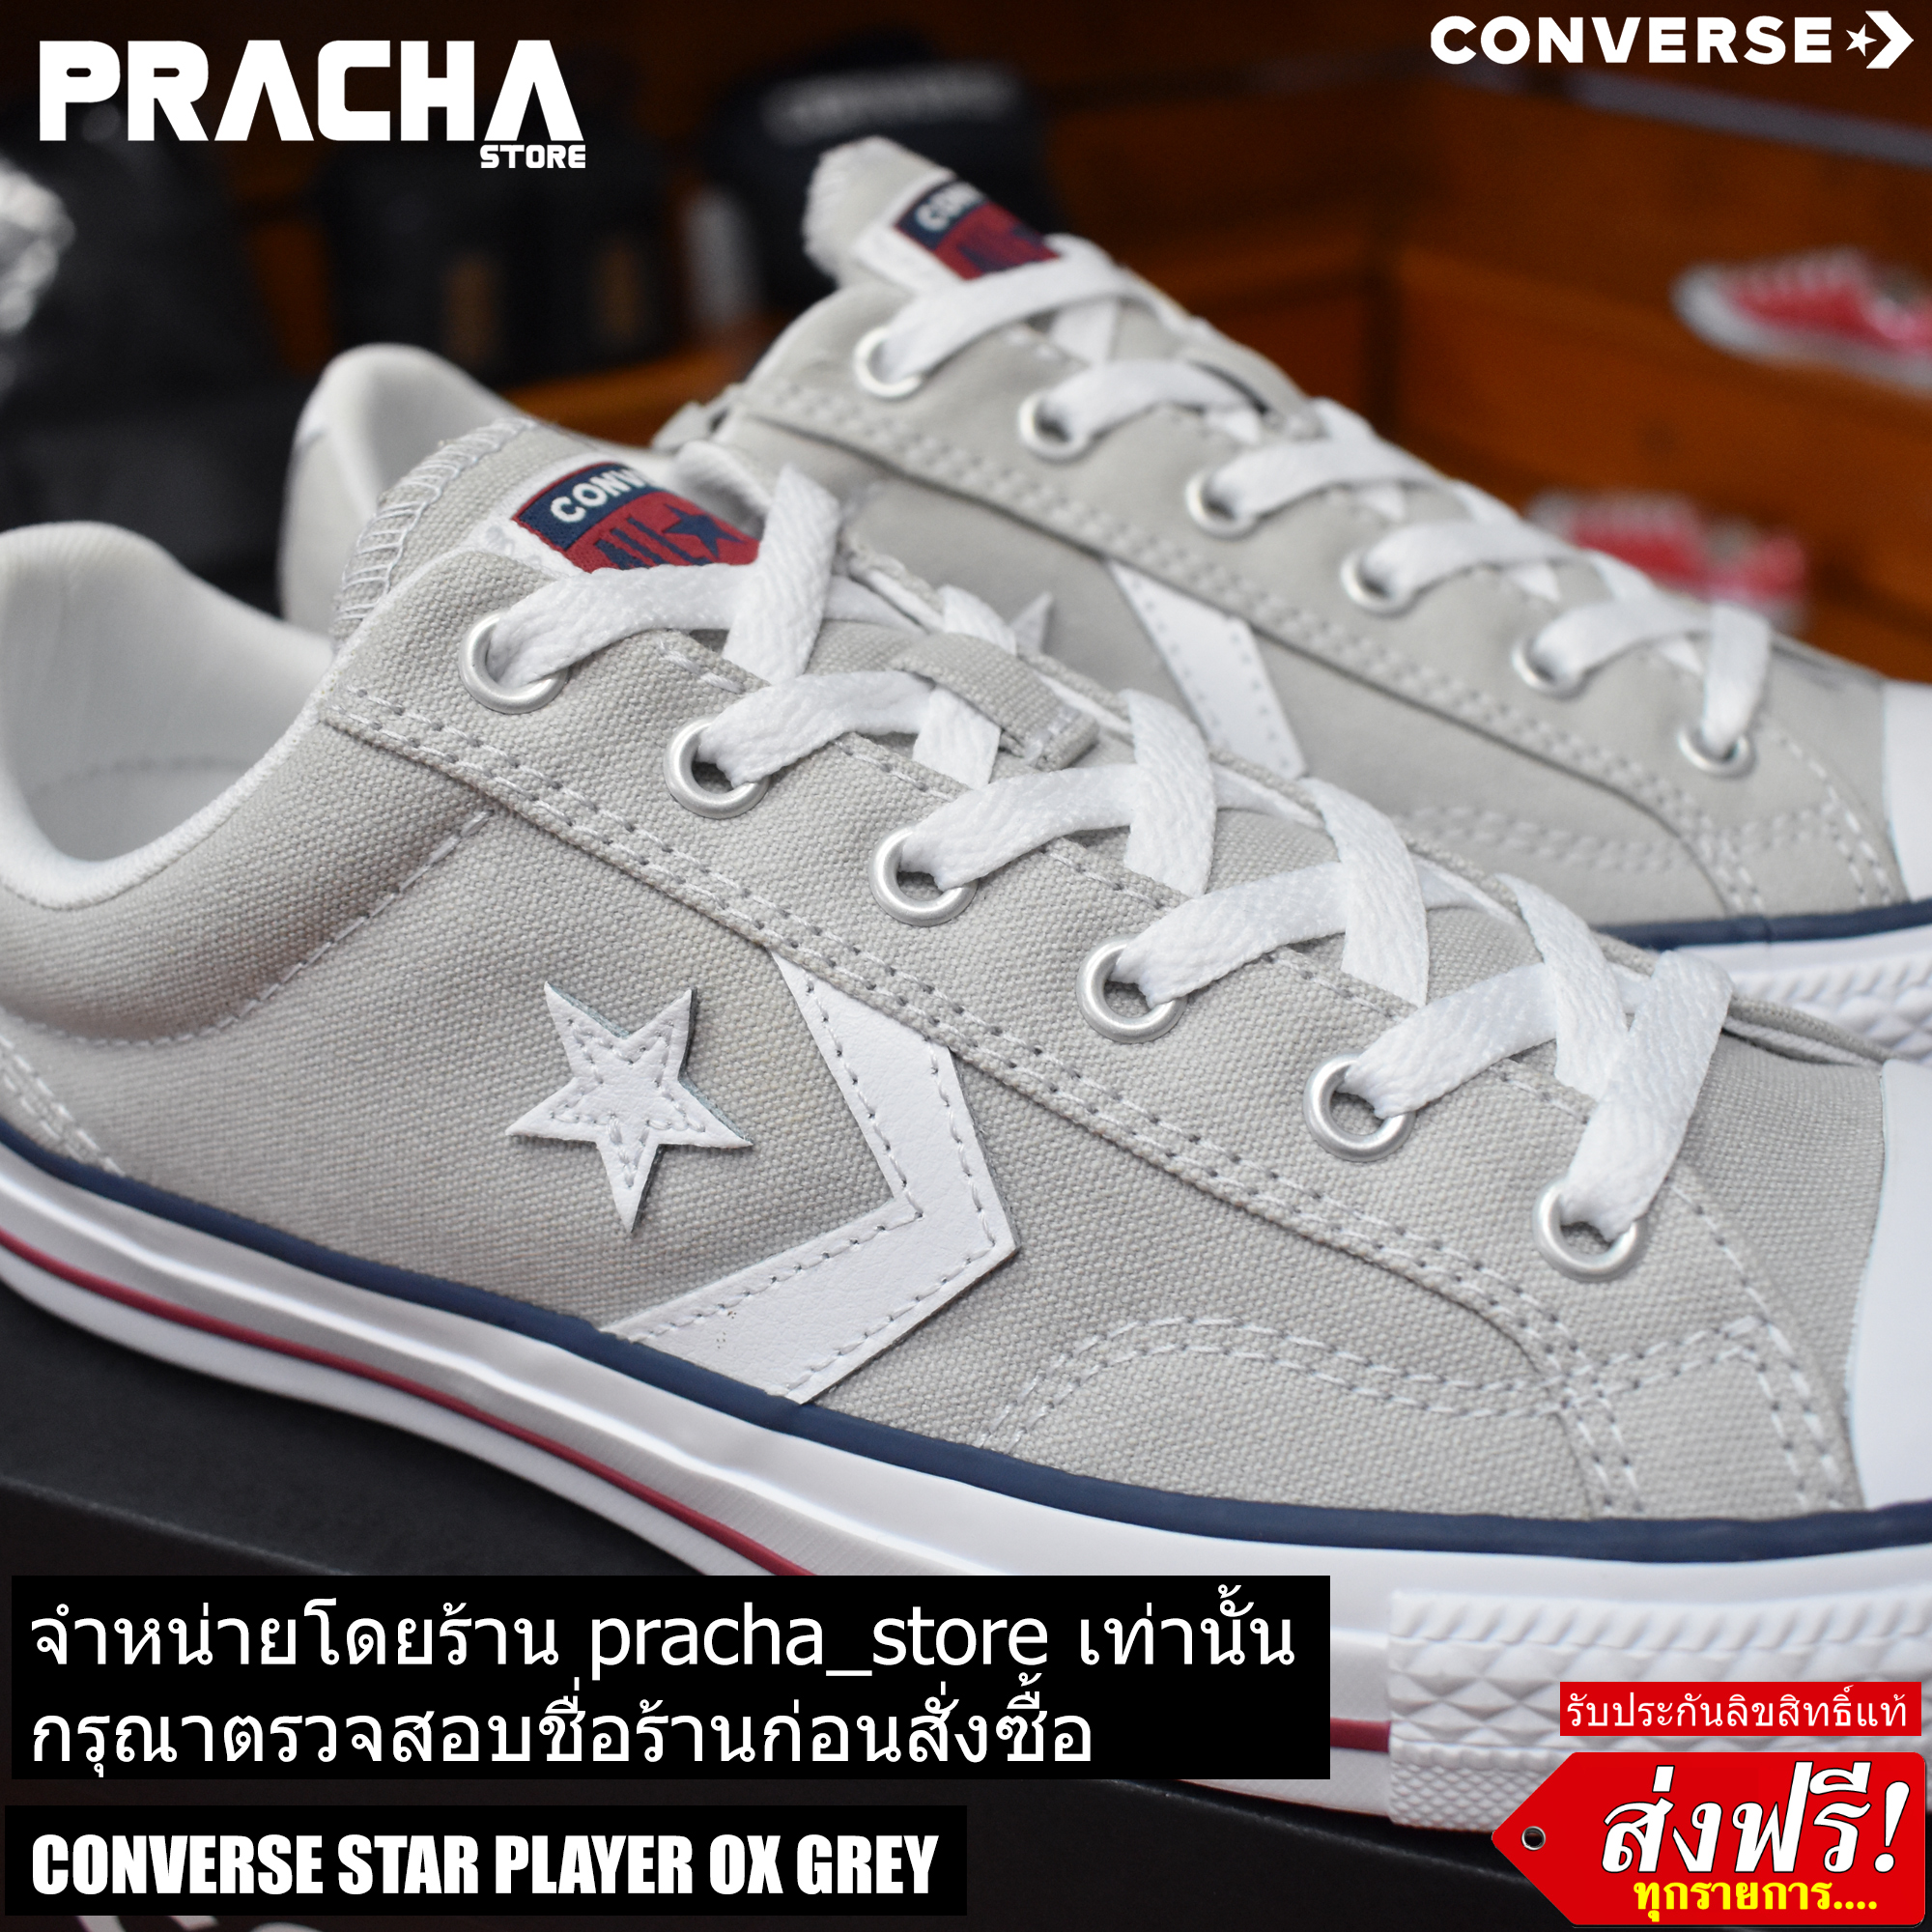 convers star player